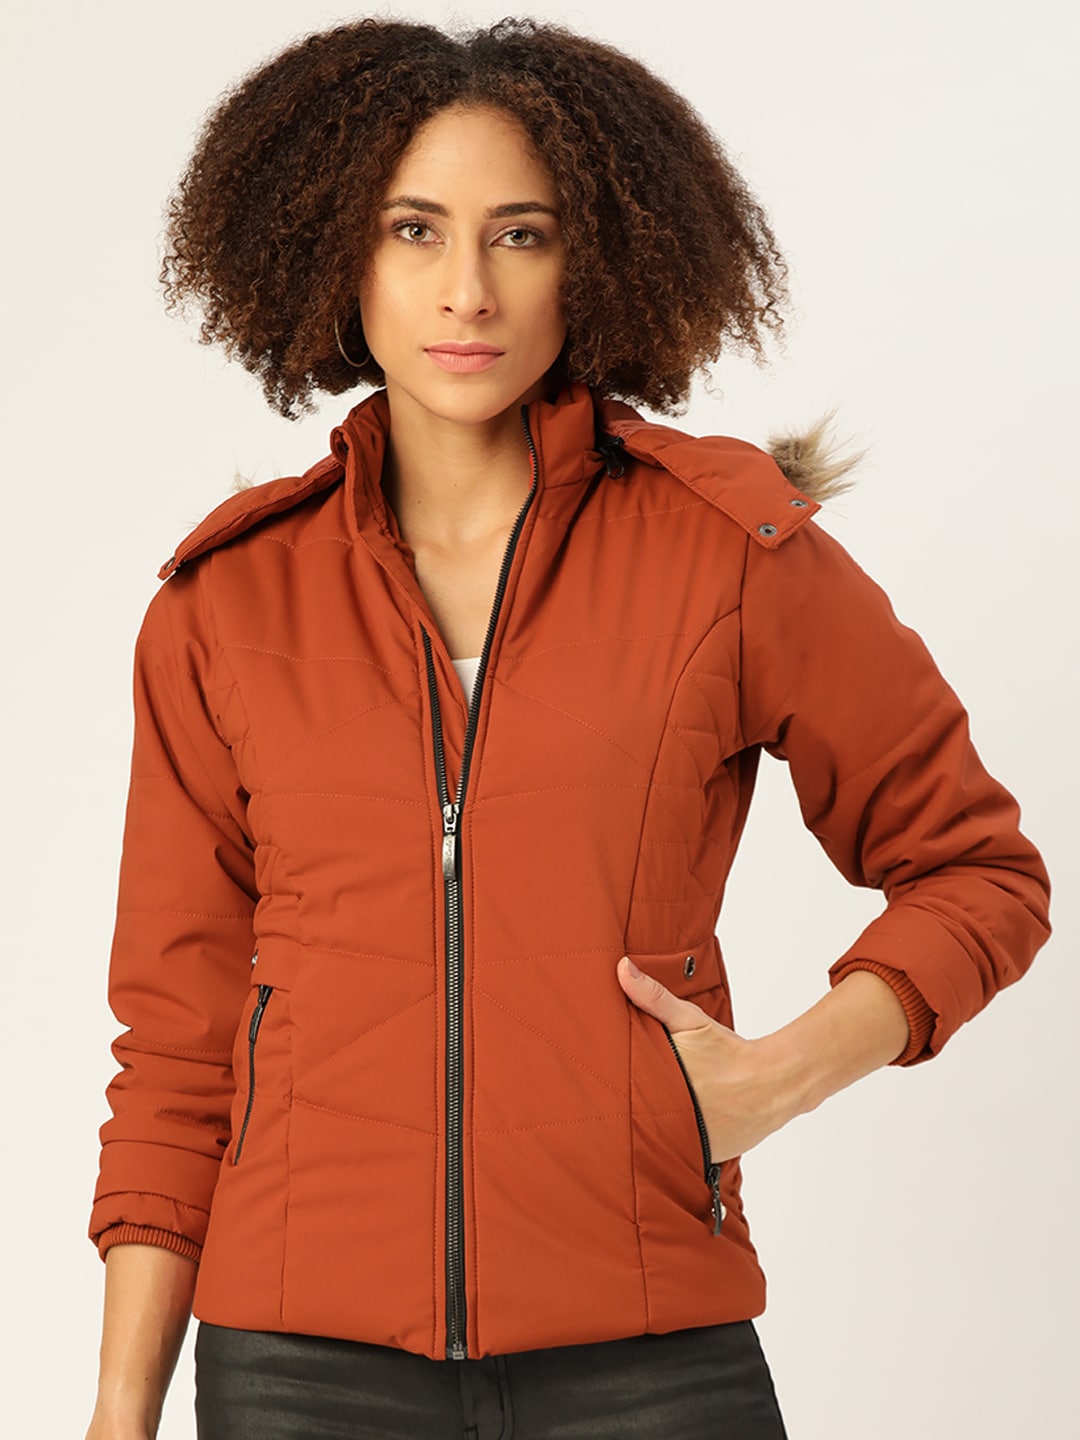 Monte Carlo Women Rust Orange Solid Parka Jacket with Detachable Hood Price in India